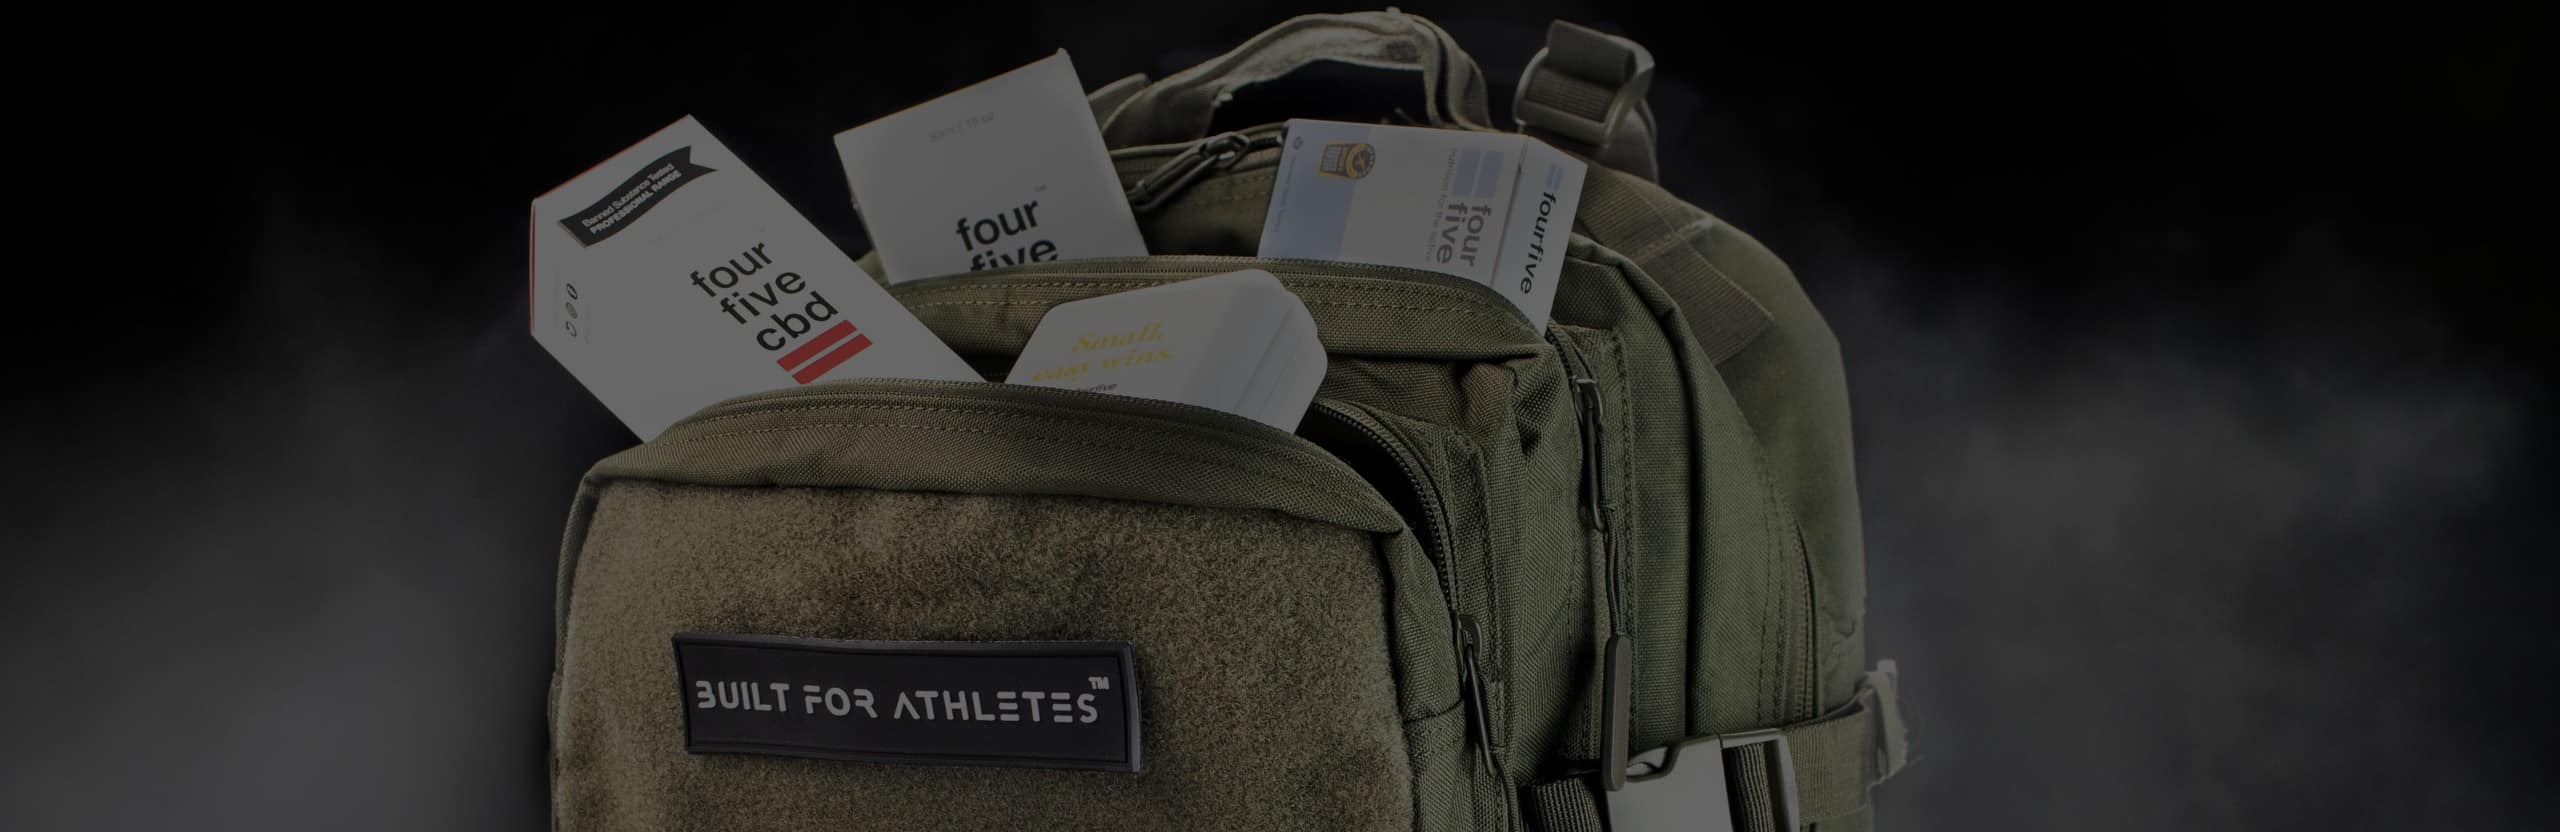 Built for Athletes x fourfive Giveaway